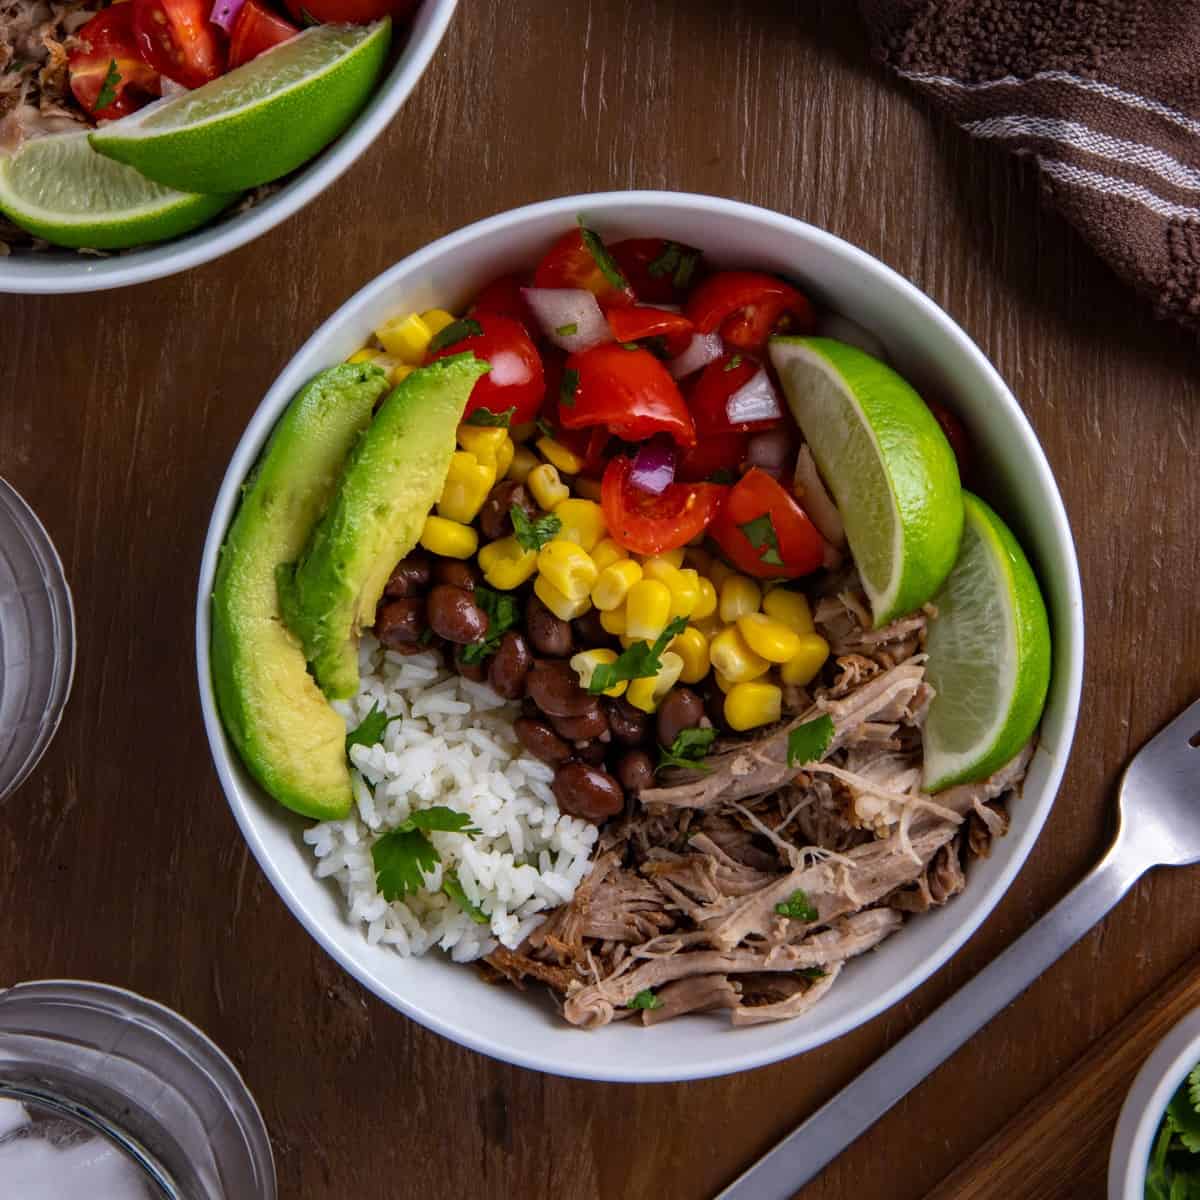 White bowl filled with pork carnitas, black beans, corn, salsa, garnished with lime slices and avocado wedges.